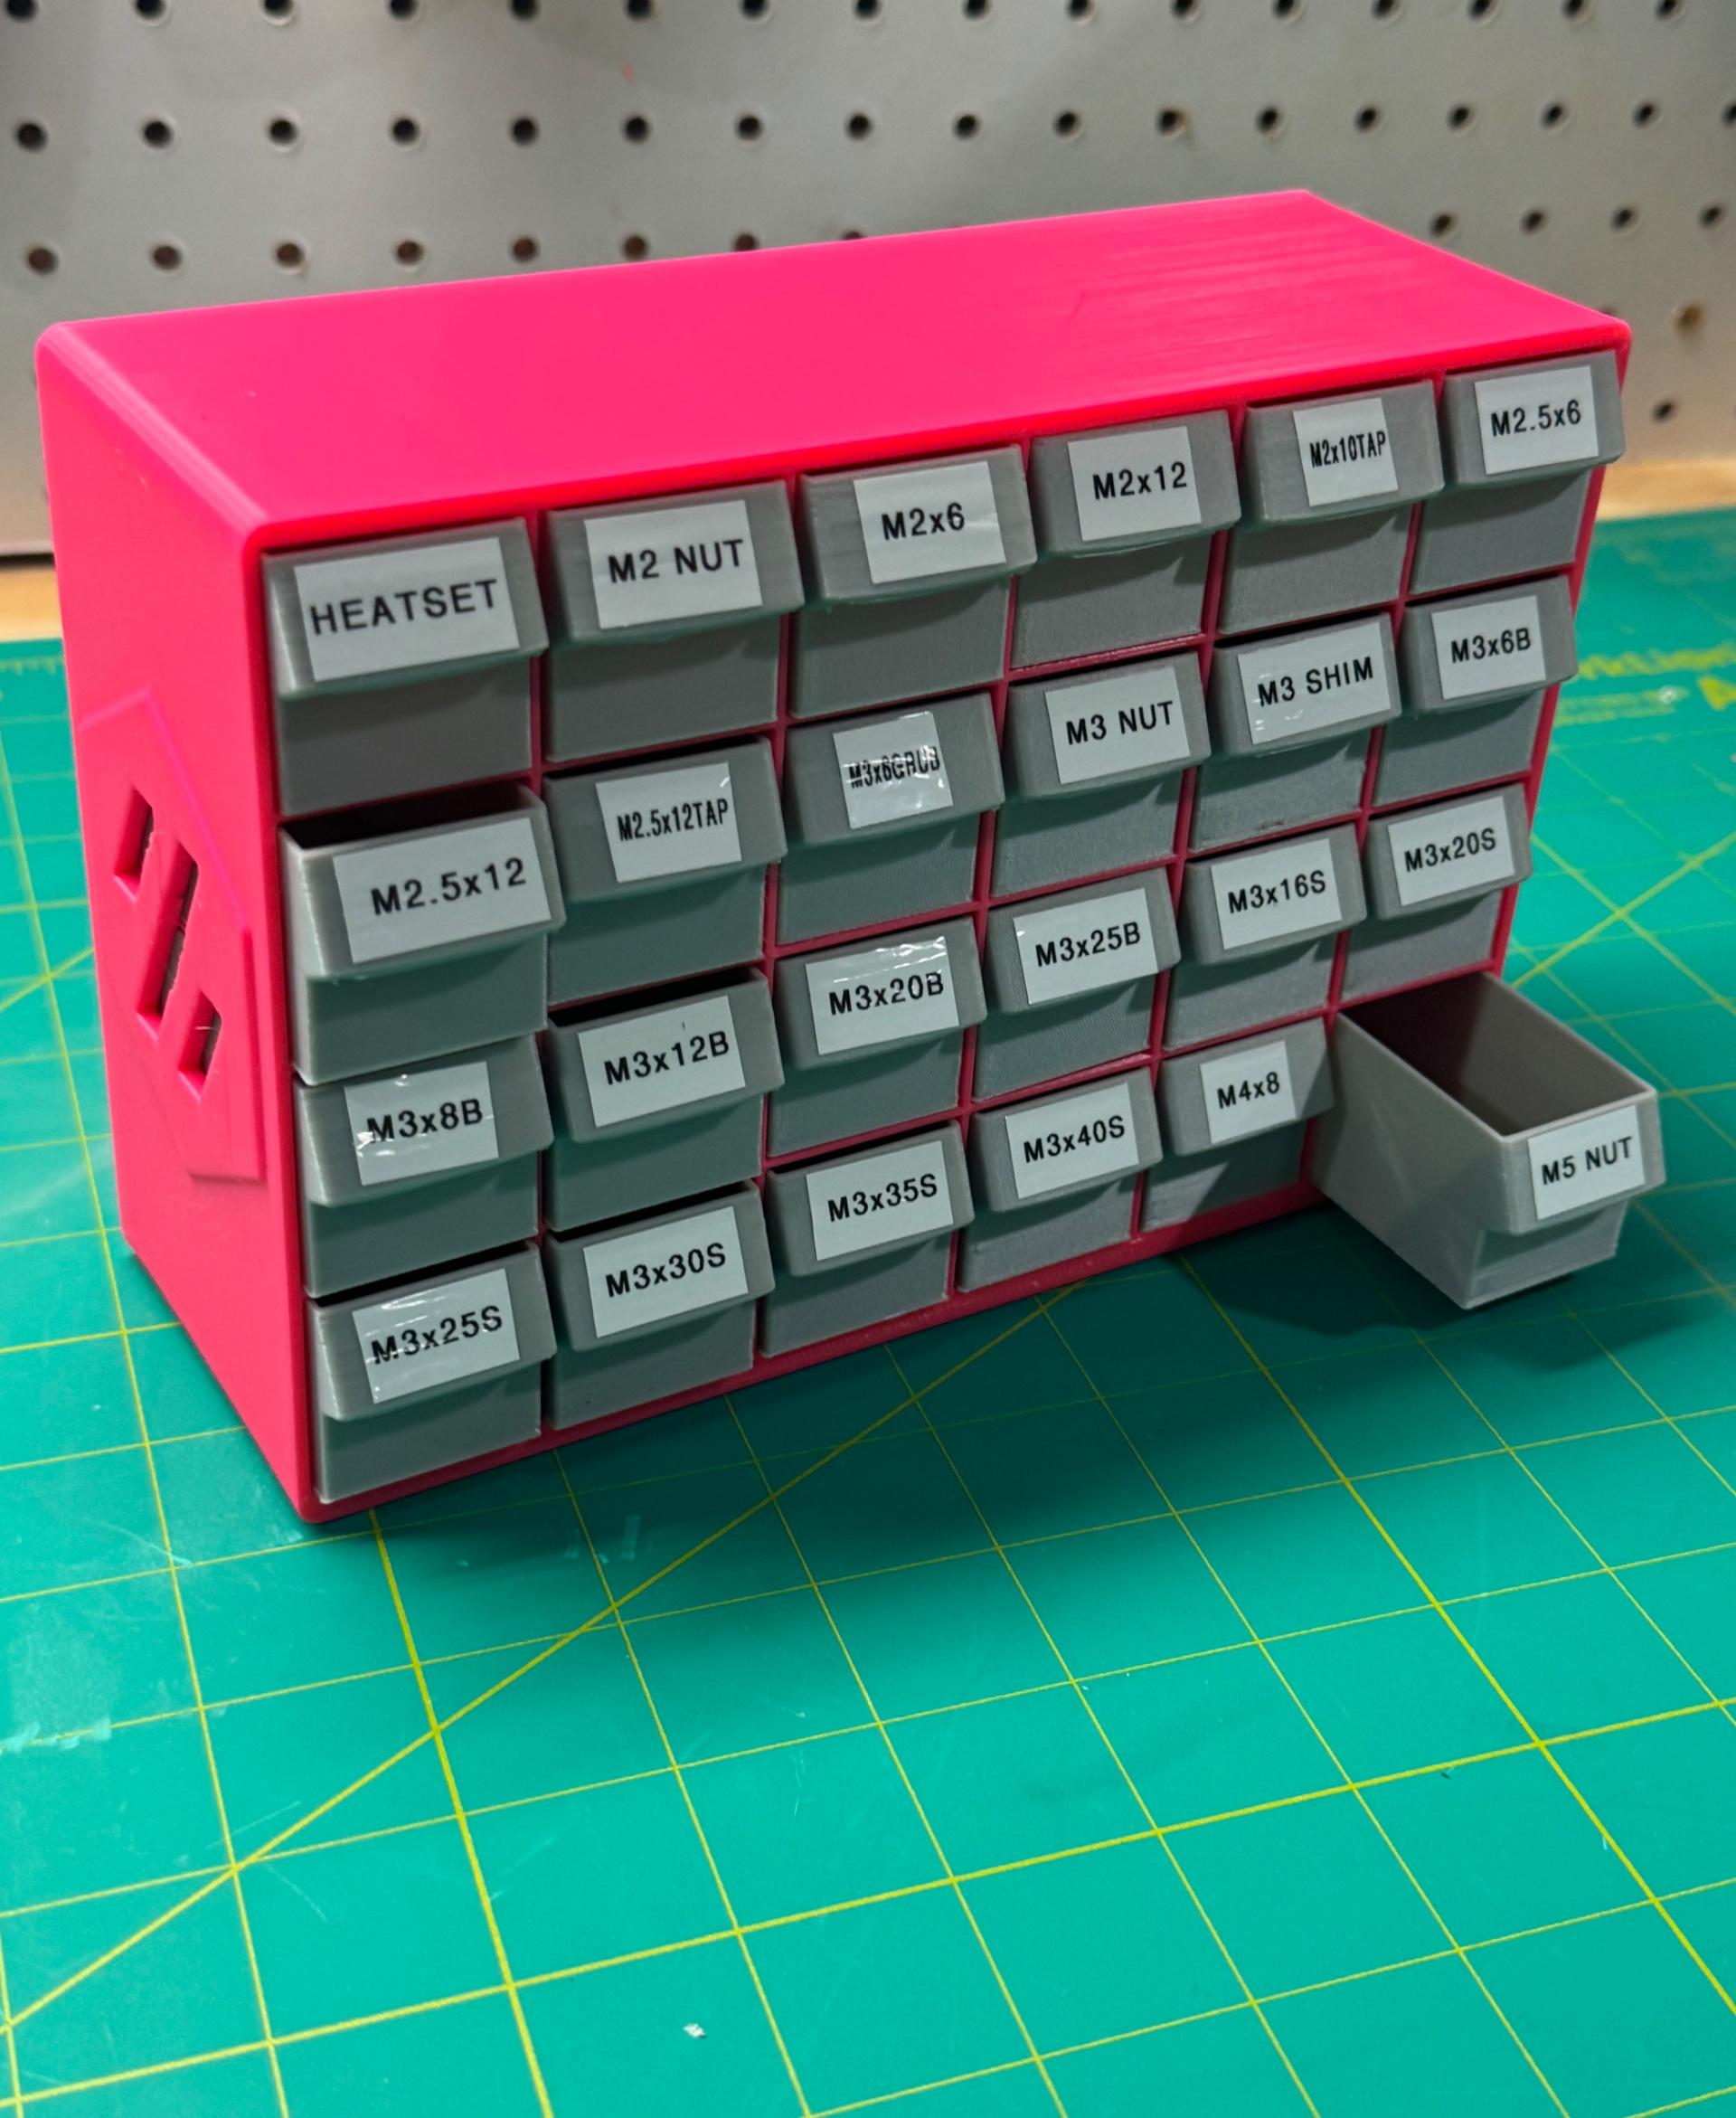 Voron Hardware Organizer EXTENDED REMIX - Awesome remix! Perfect for the Micron BOM. - 3d model